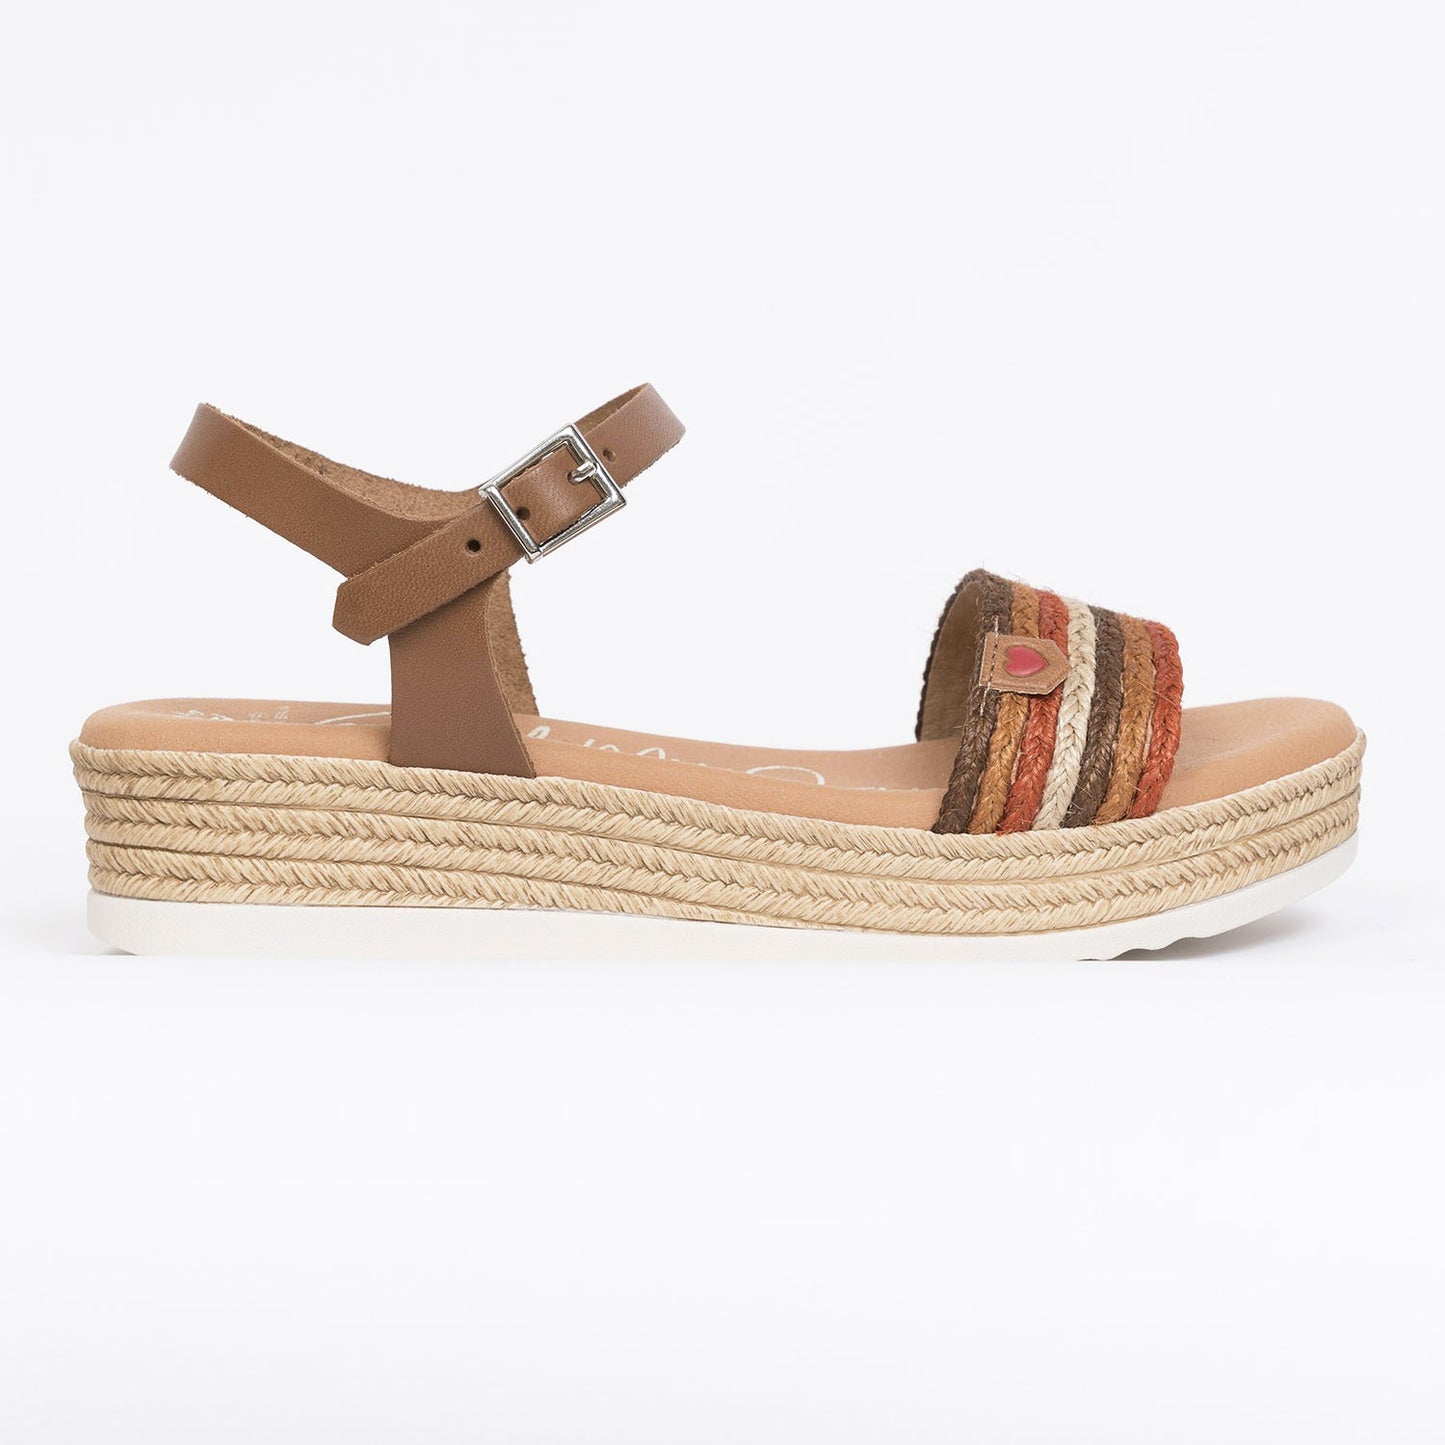 Oh My Sandals Sandali Camel in pelle Made in Spagna